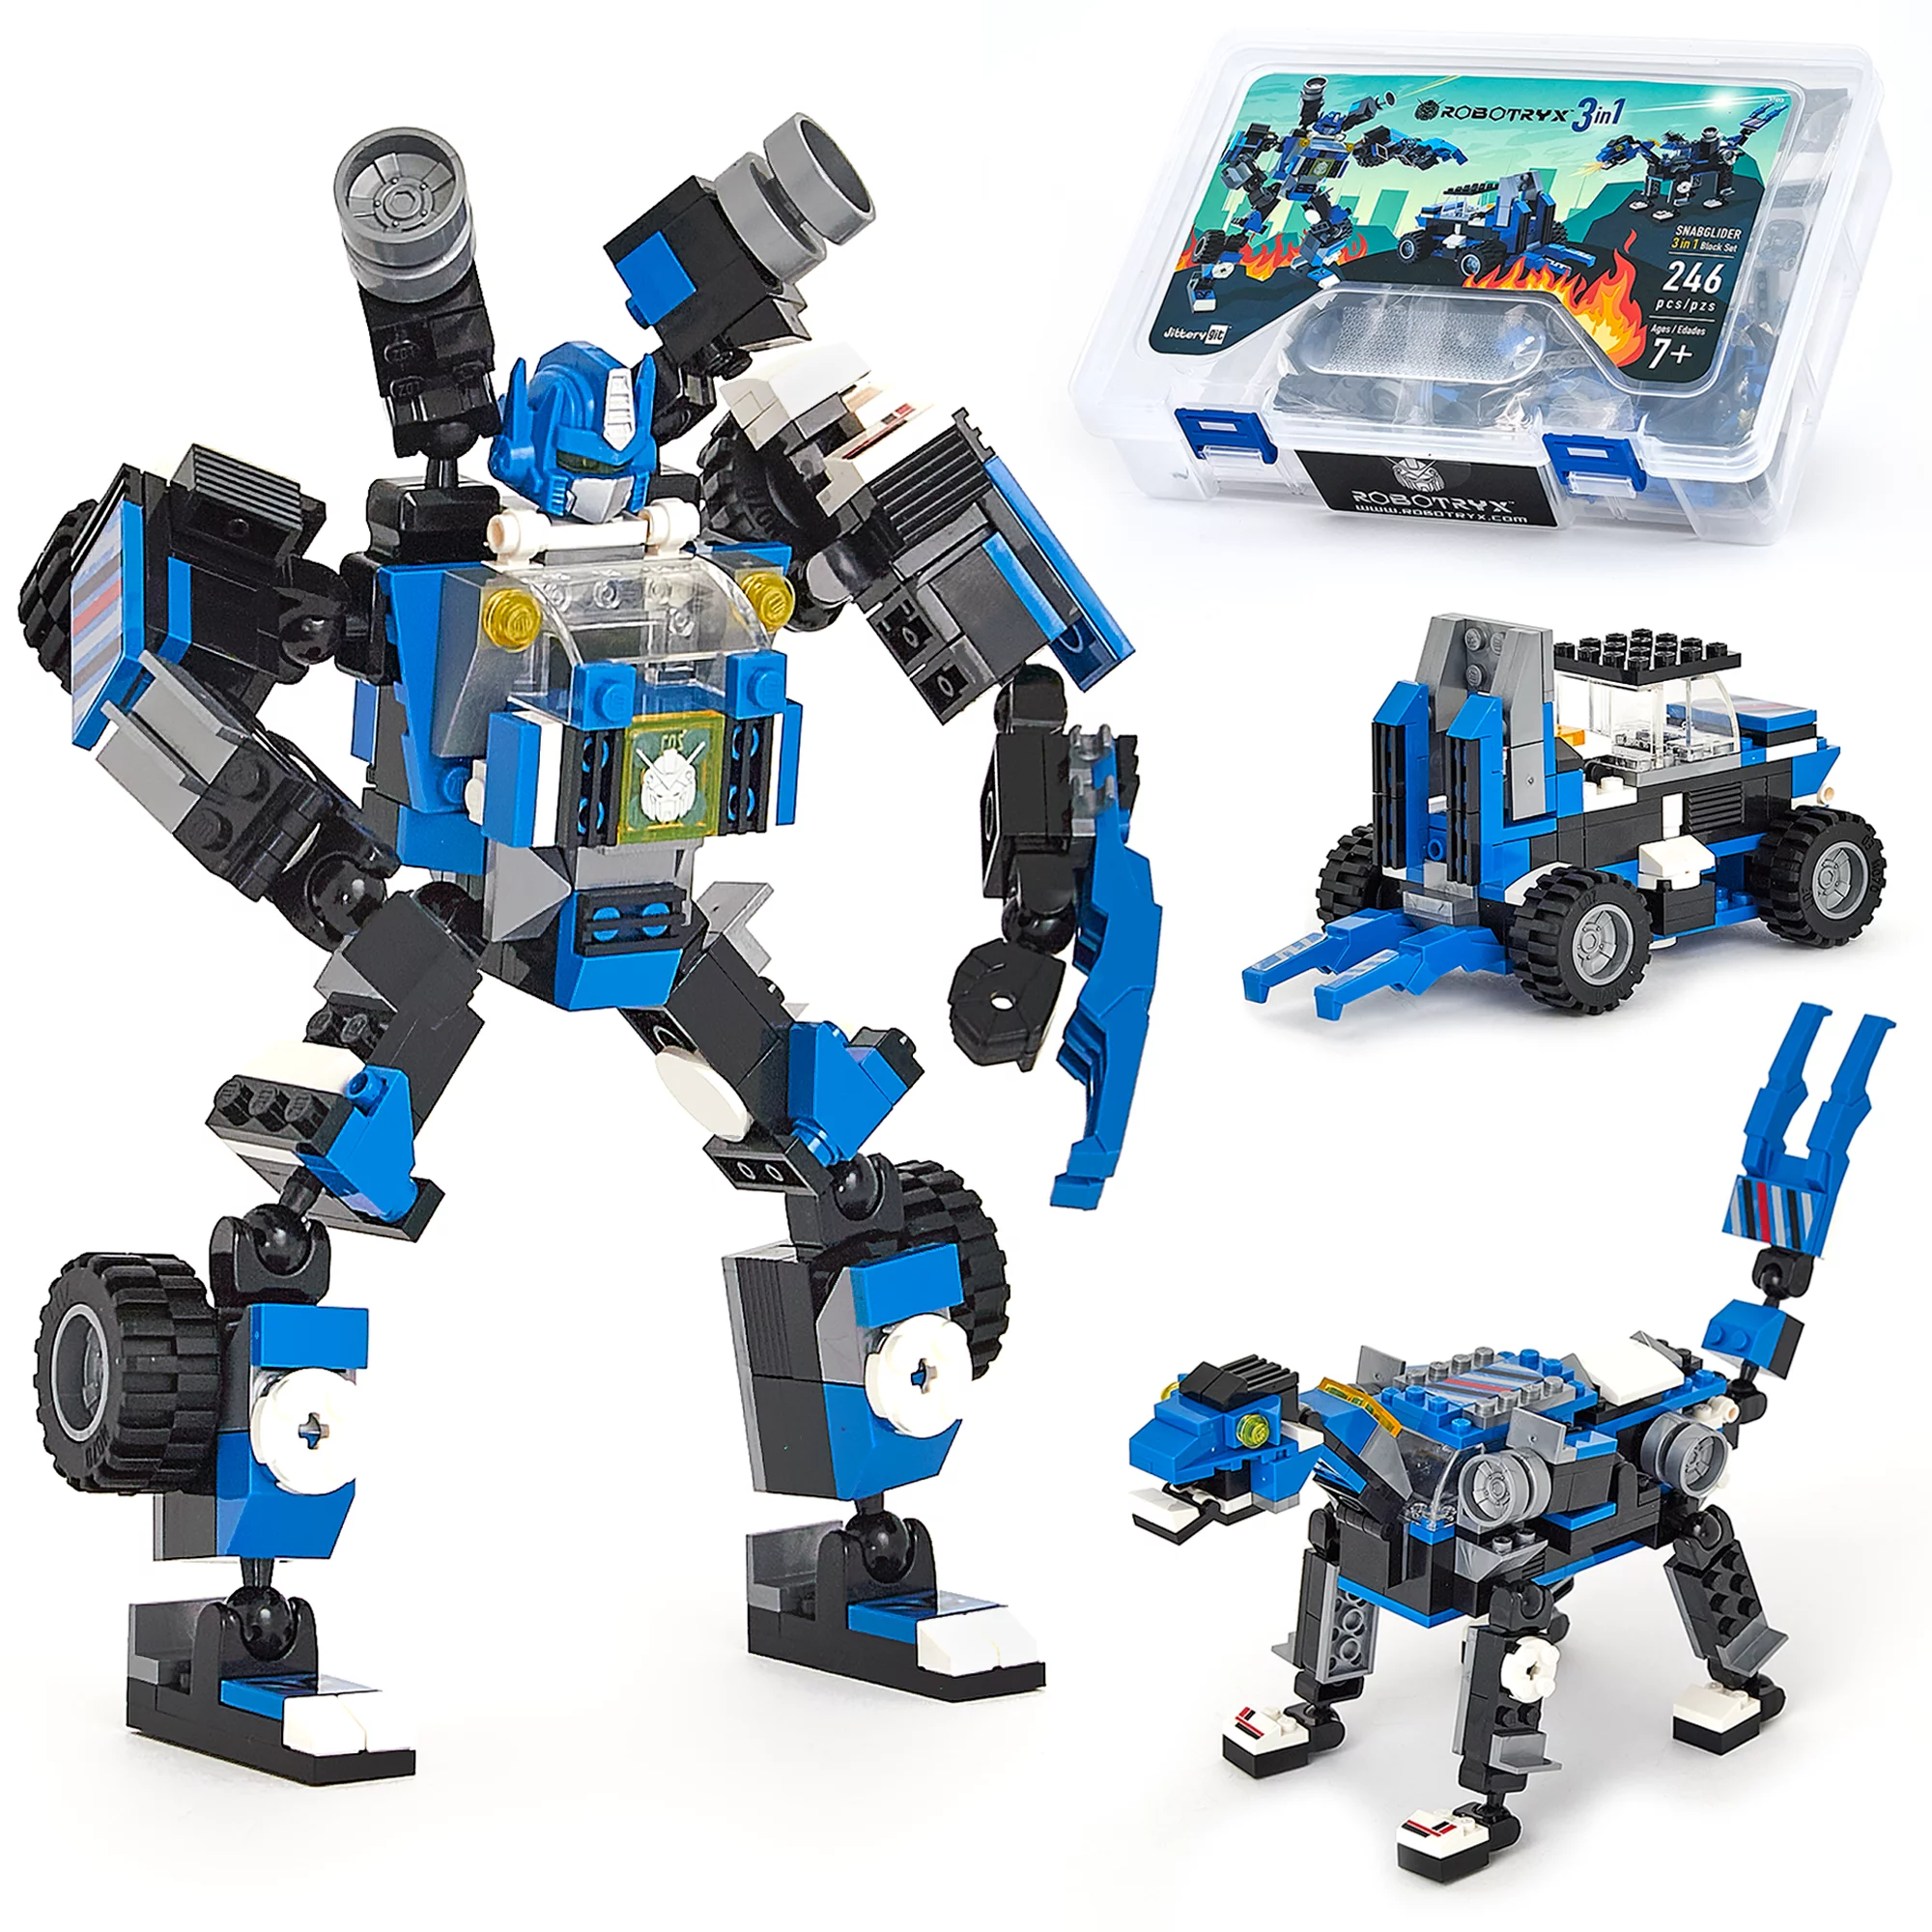 JitteryGit Robot STEM Building Toys for Boys | Christmas Gifts for Kids Ages 7 8 9 10 11 12 13 14